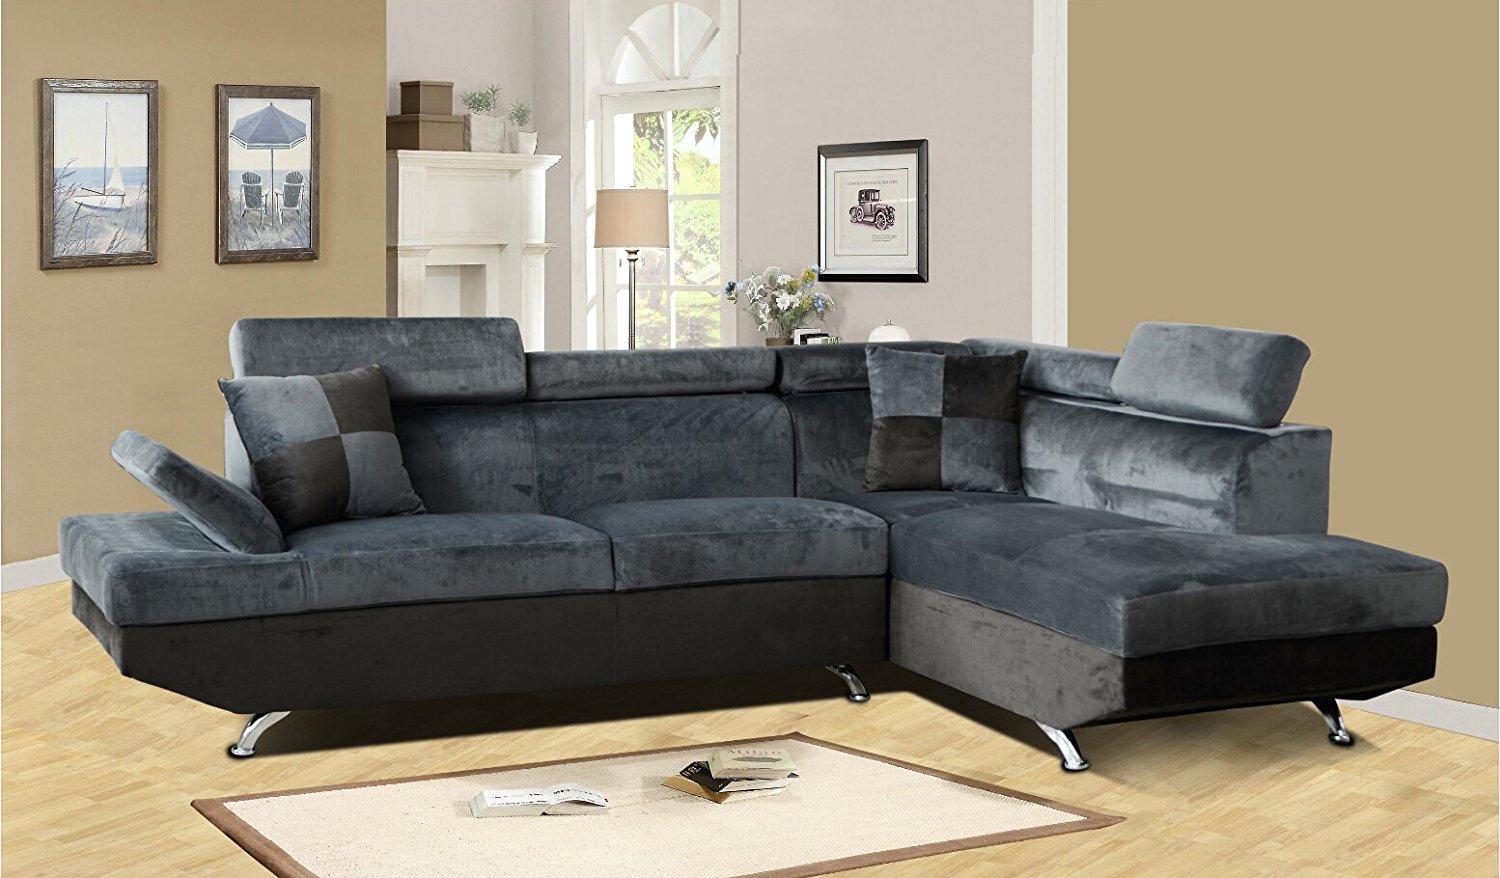 Beverly Furniture F2806B-2PC-GY 2 Piece Microfiber & Faux Leather Left Facing Sectional Sofa Set, Gray